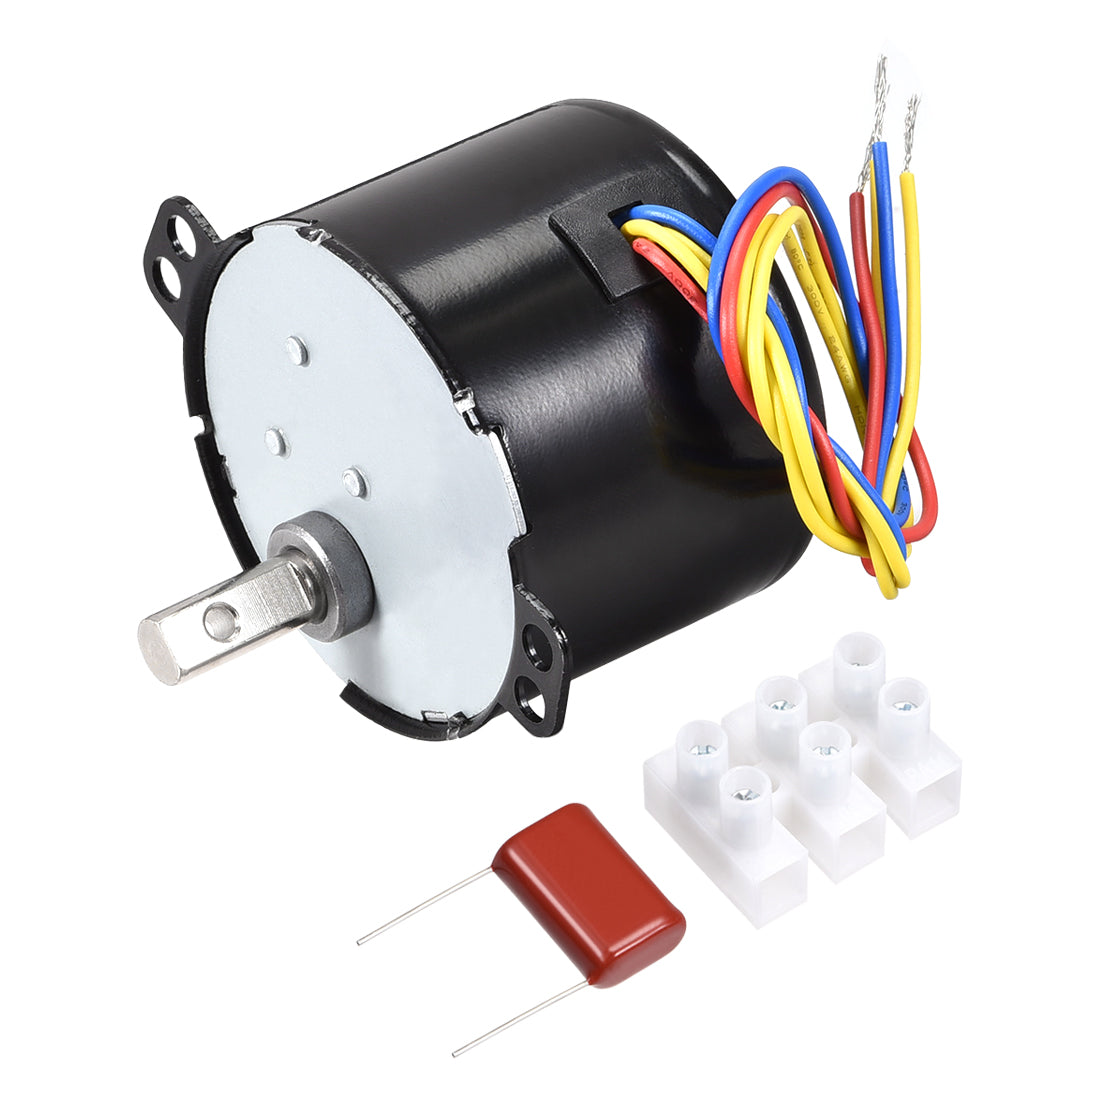 uxcell Uxcell AC110V Synchronous Motor Plastic Gear Terminal 20RPM Eccentric Shaft with Hole